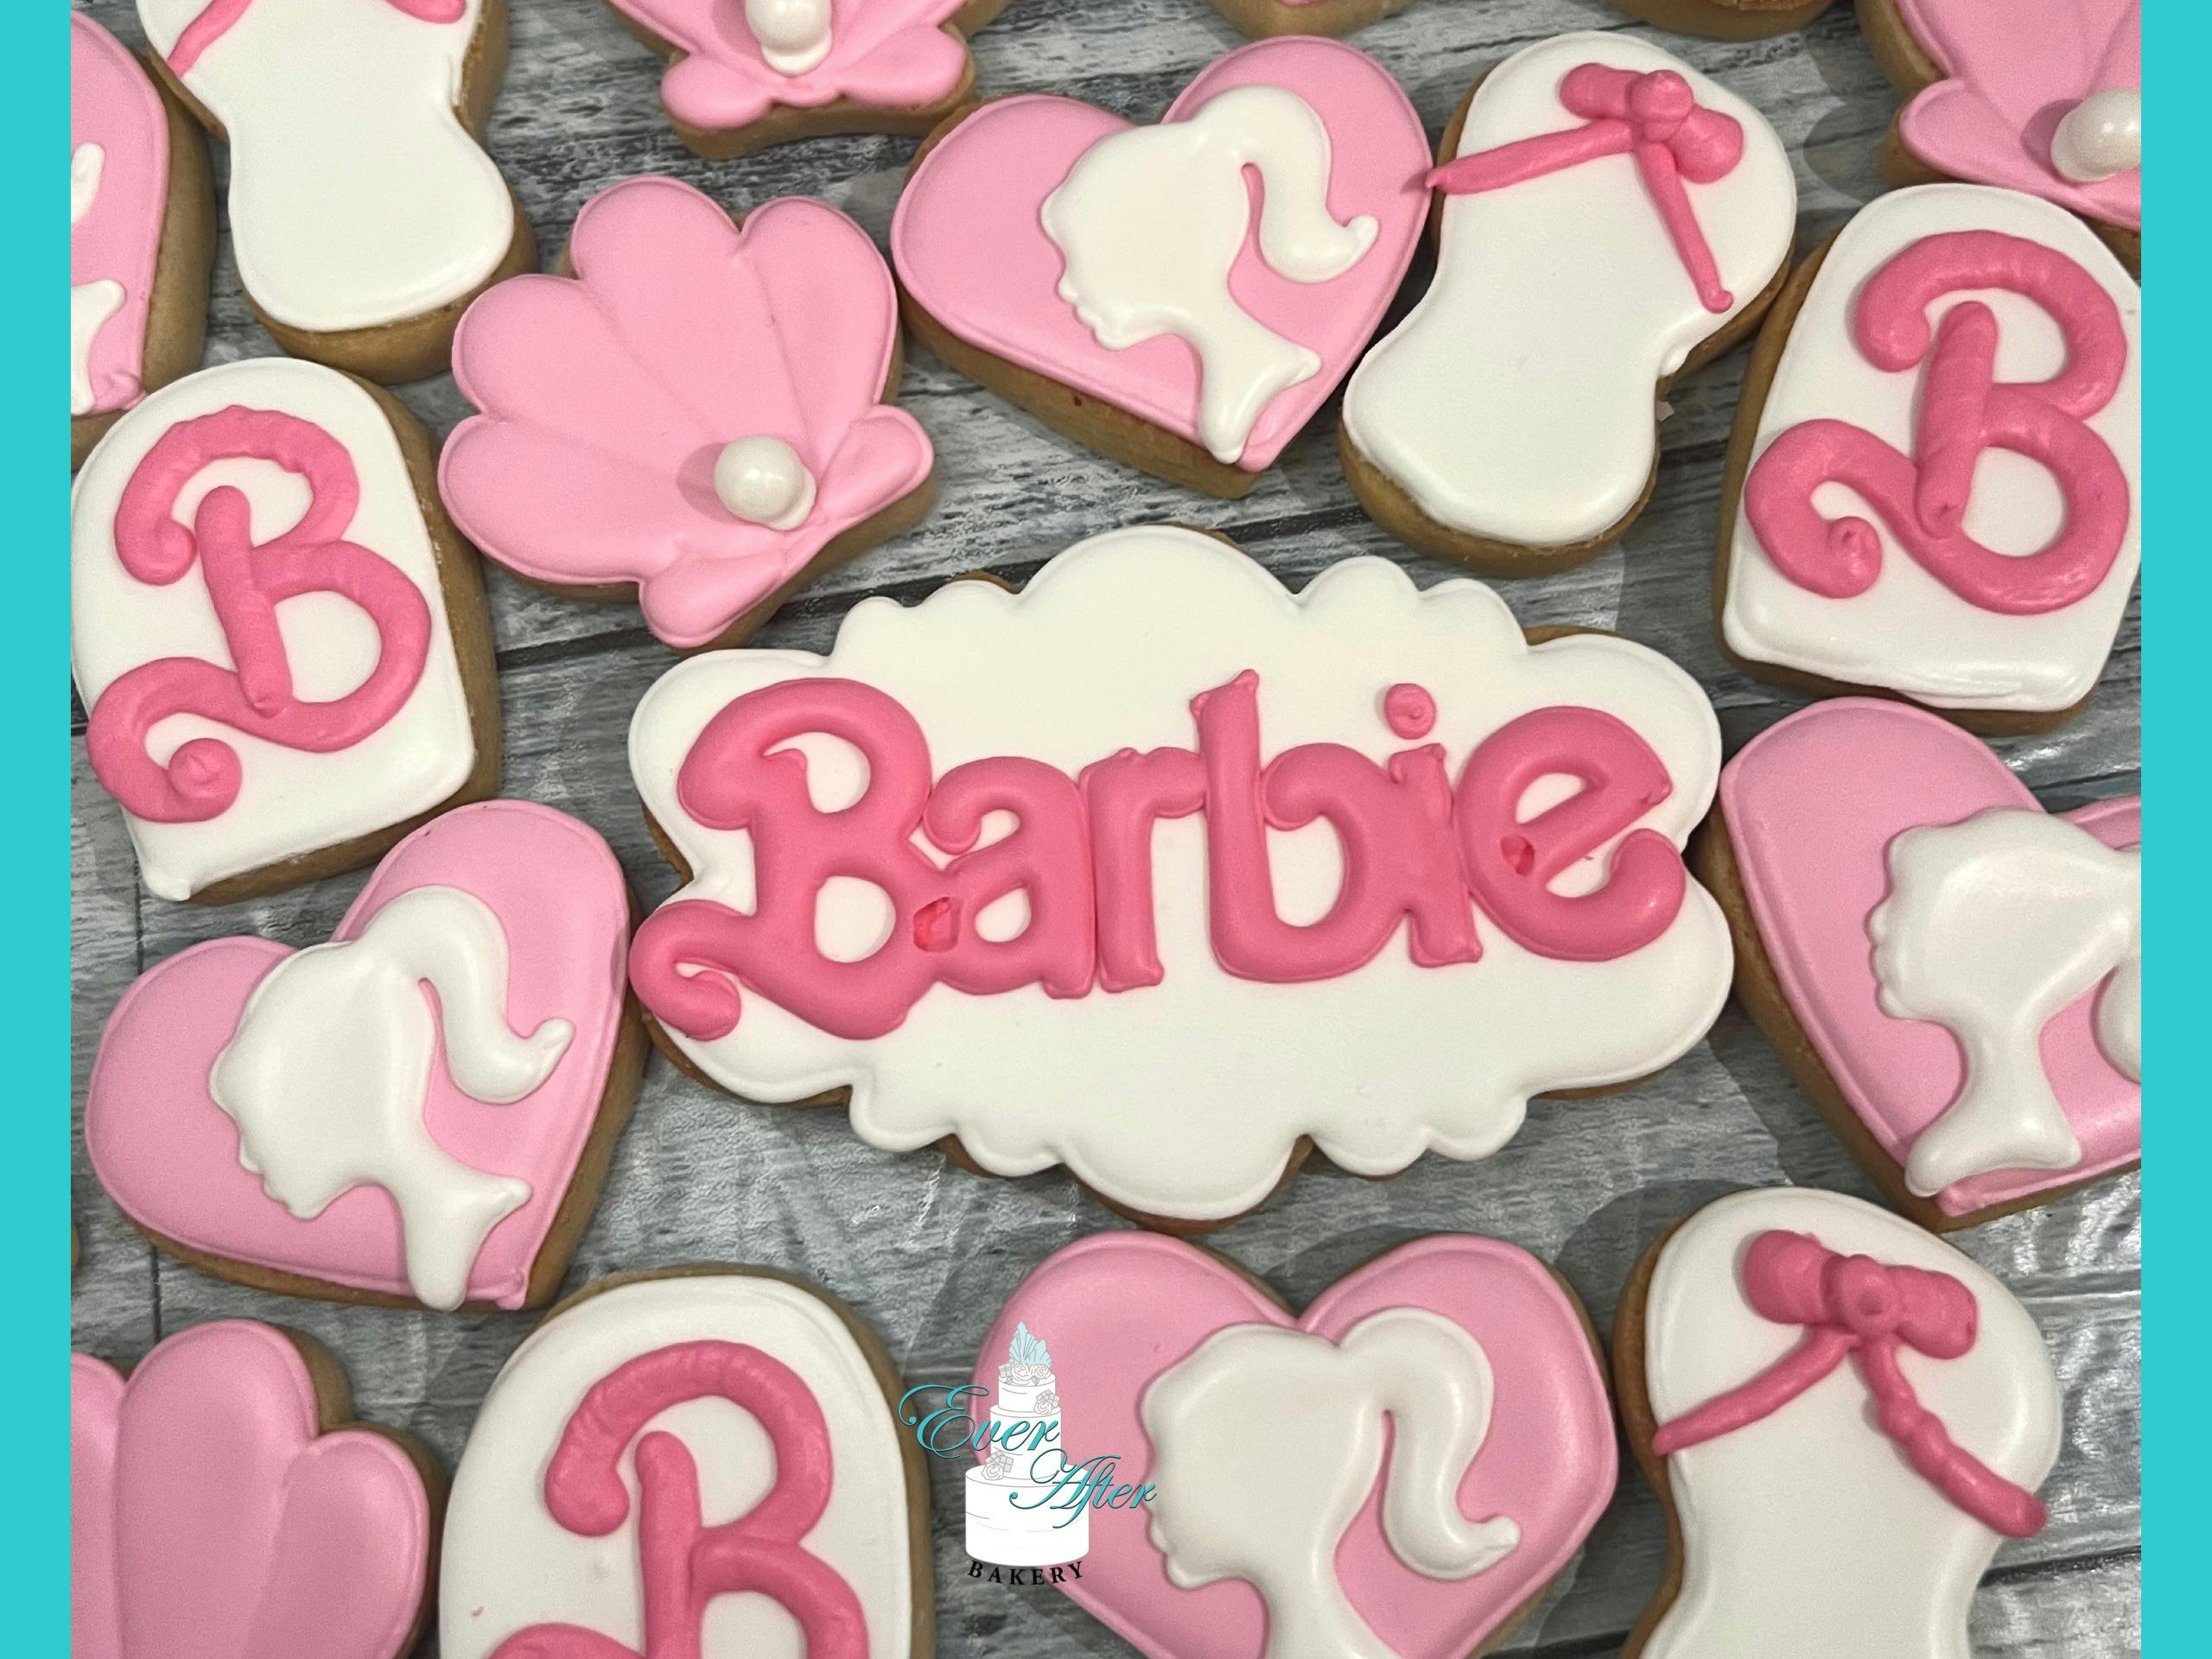 Barbie Cookies and Cakes